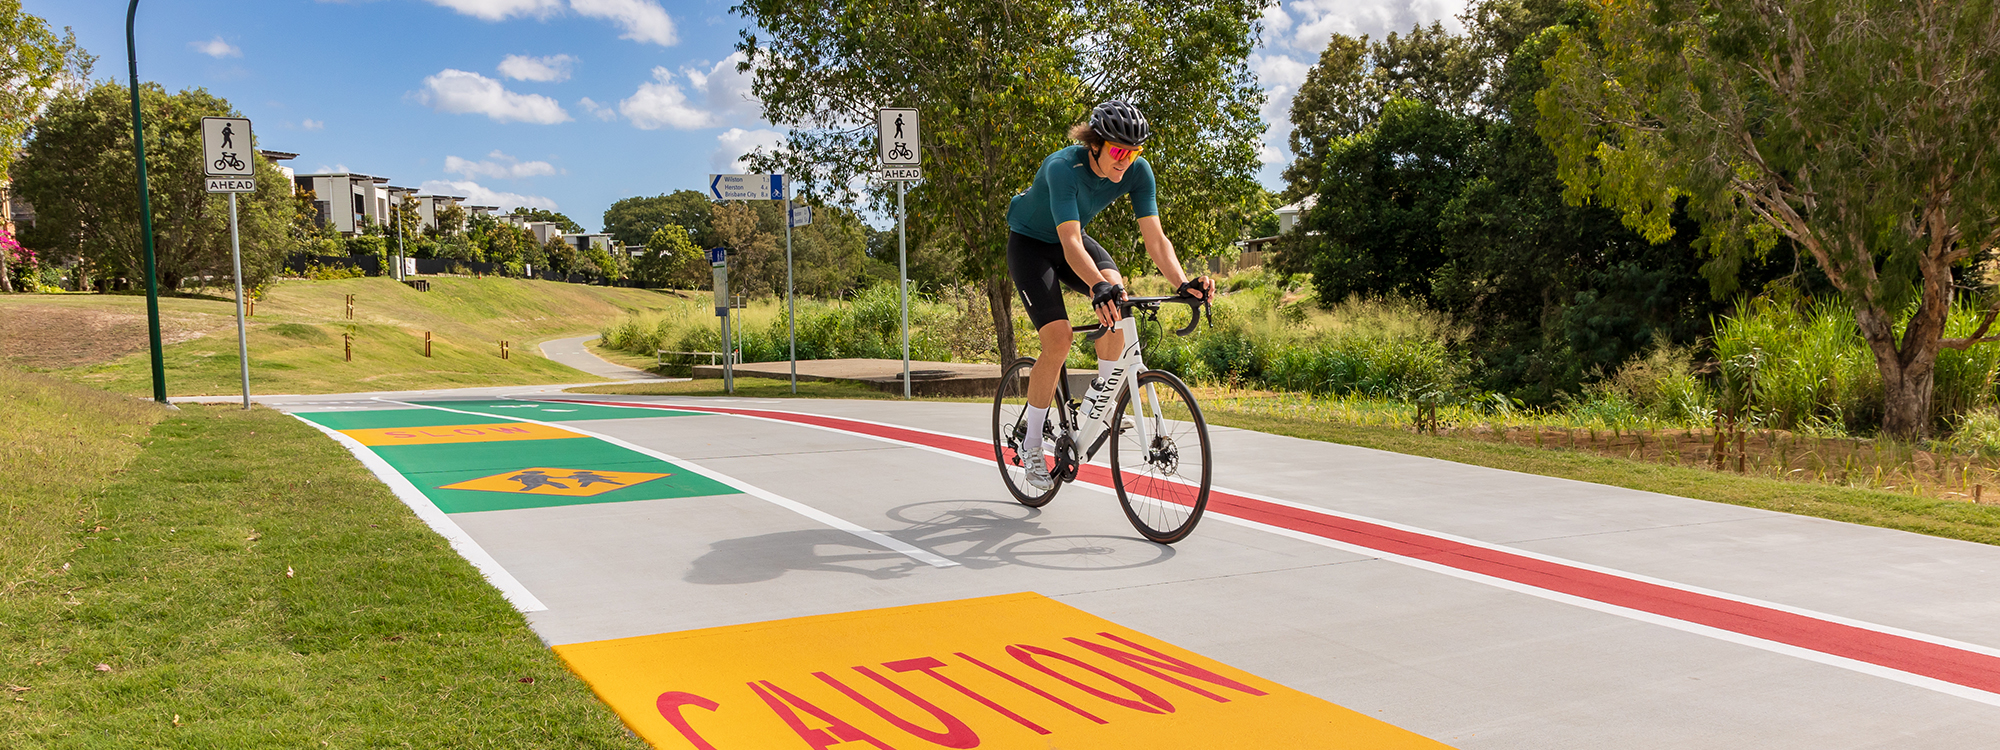 A cyclist riding on the completed Kedron Brook bikeway - Corbett Park